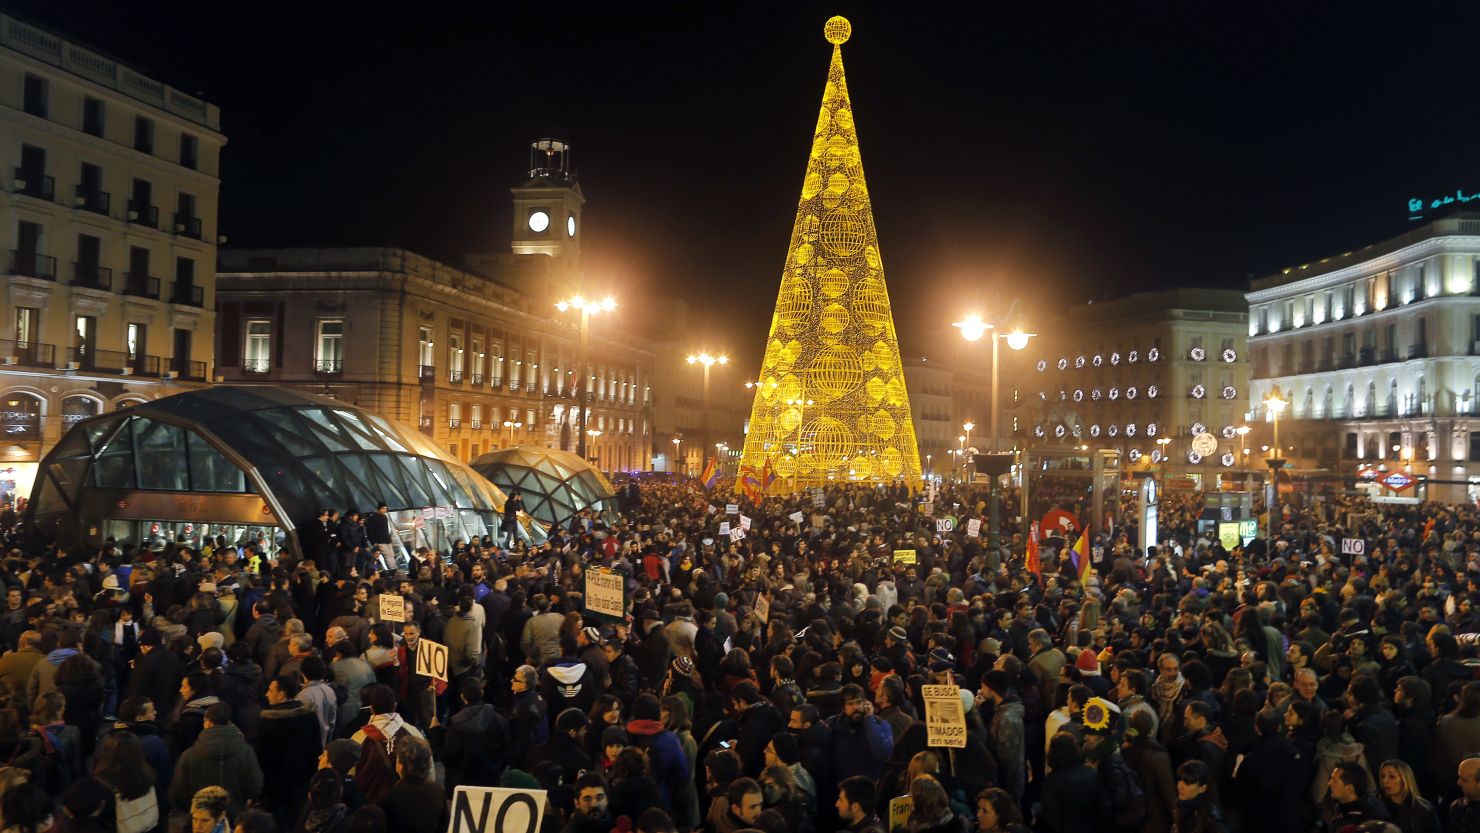 Protestors march through the city center during a demonstration against the government in Madrid on December 14, 2013.